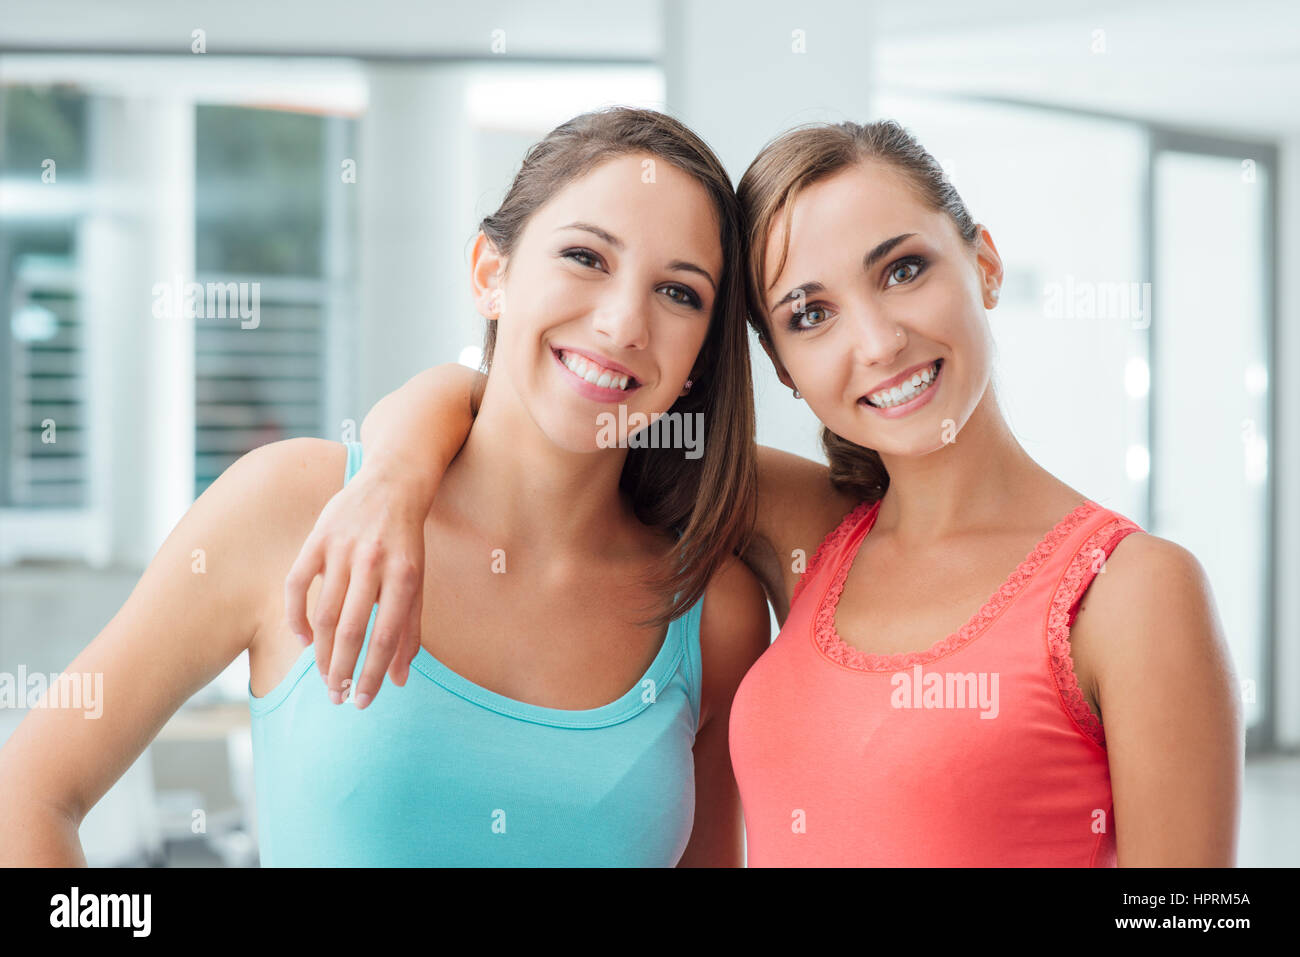 Cute smiling girls posing together and looking at camera, one is hugging her friend Stock Photo